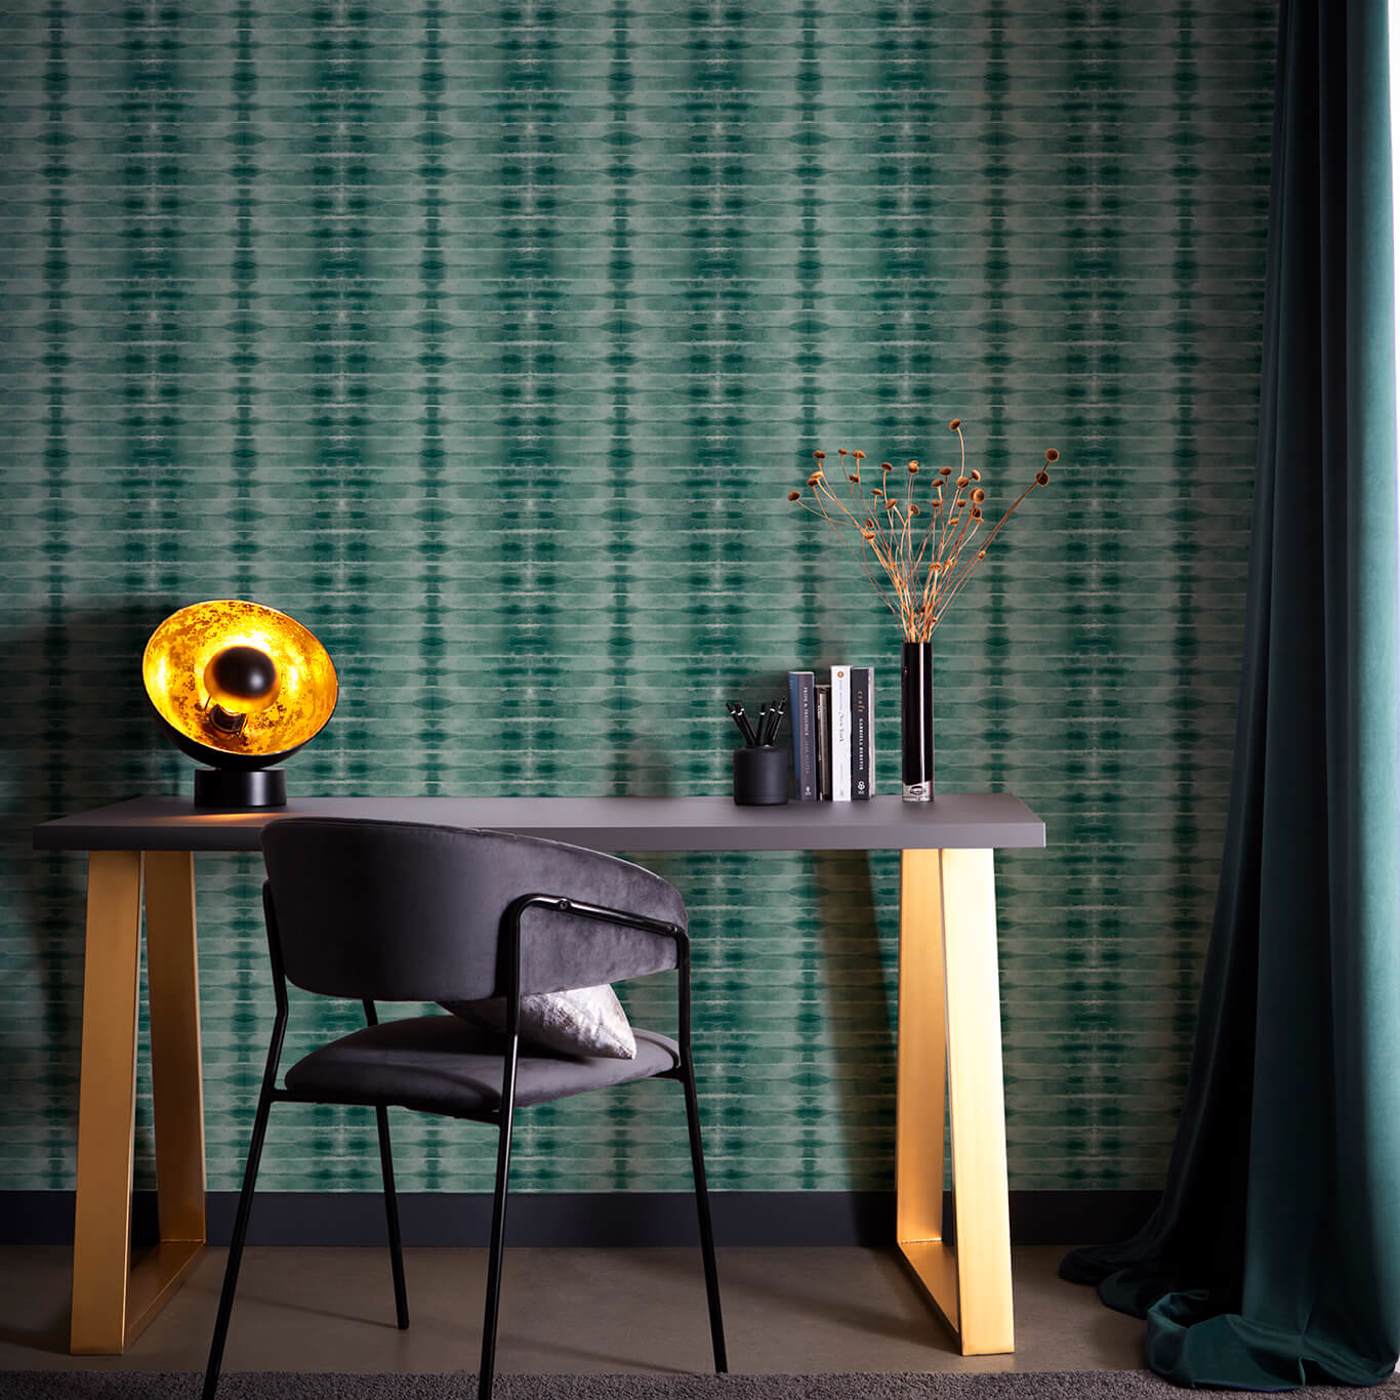 Etera Teal Wallpaper by CNC